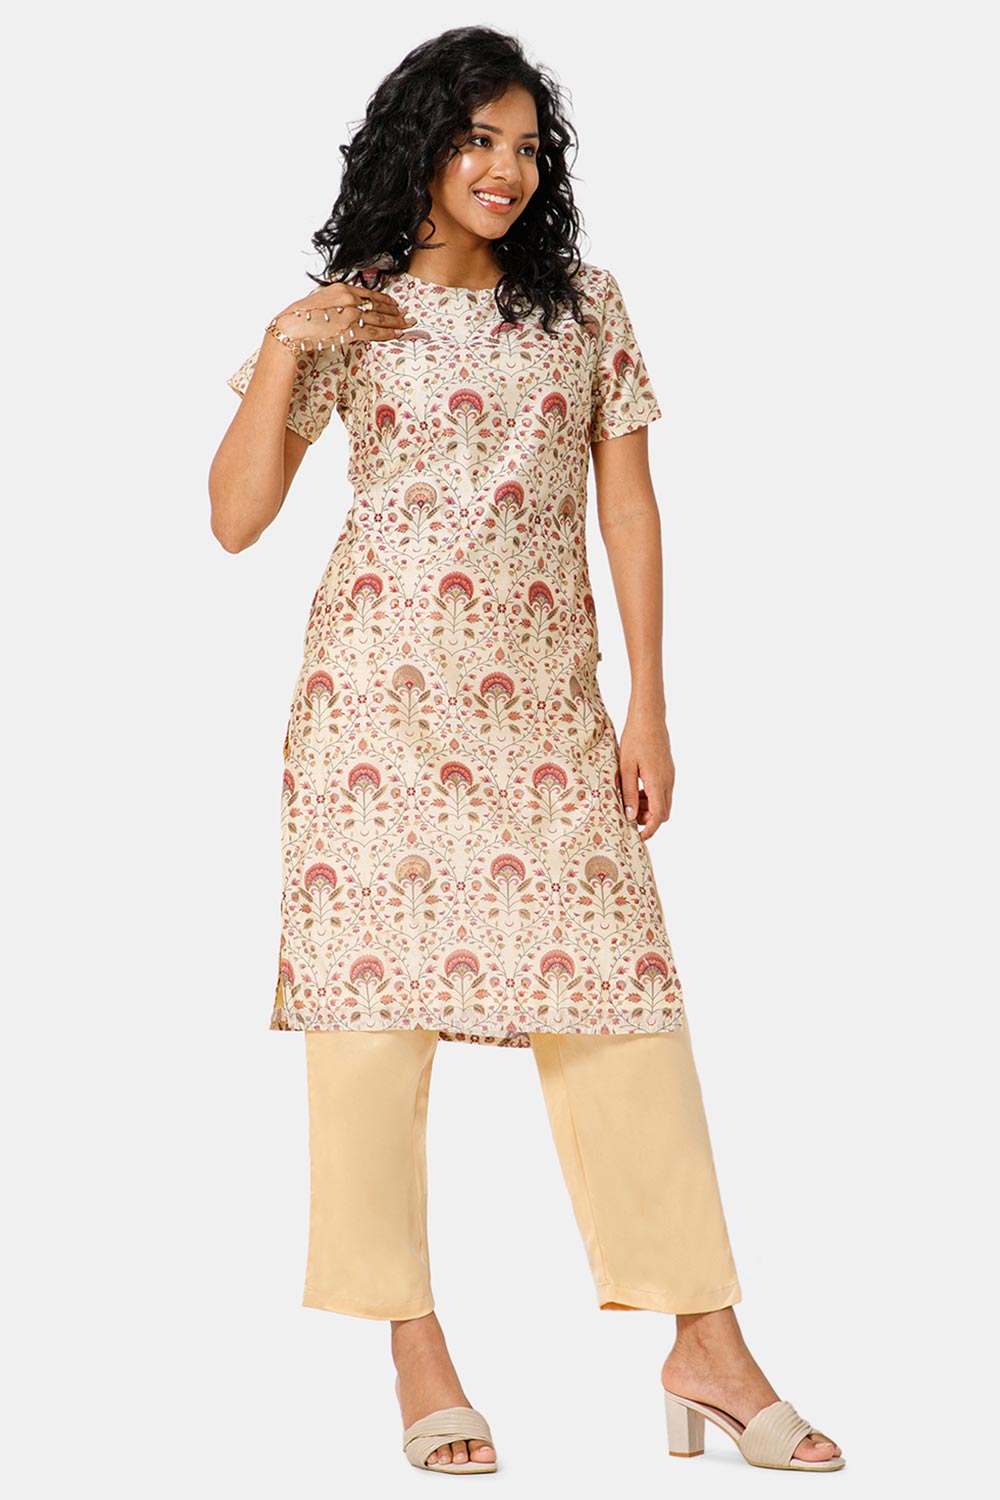 OM cotton kurti for Youth (Short length) | poojapaath.ca